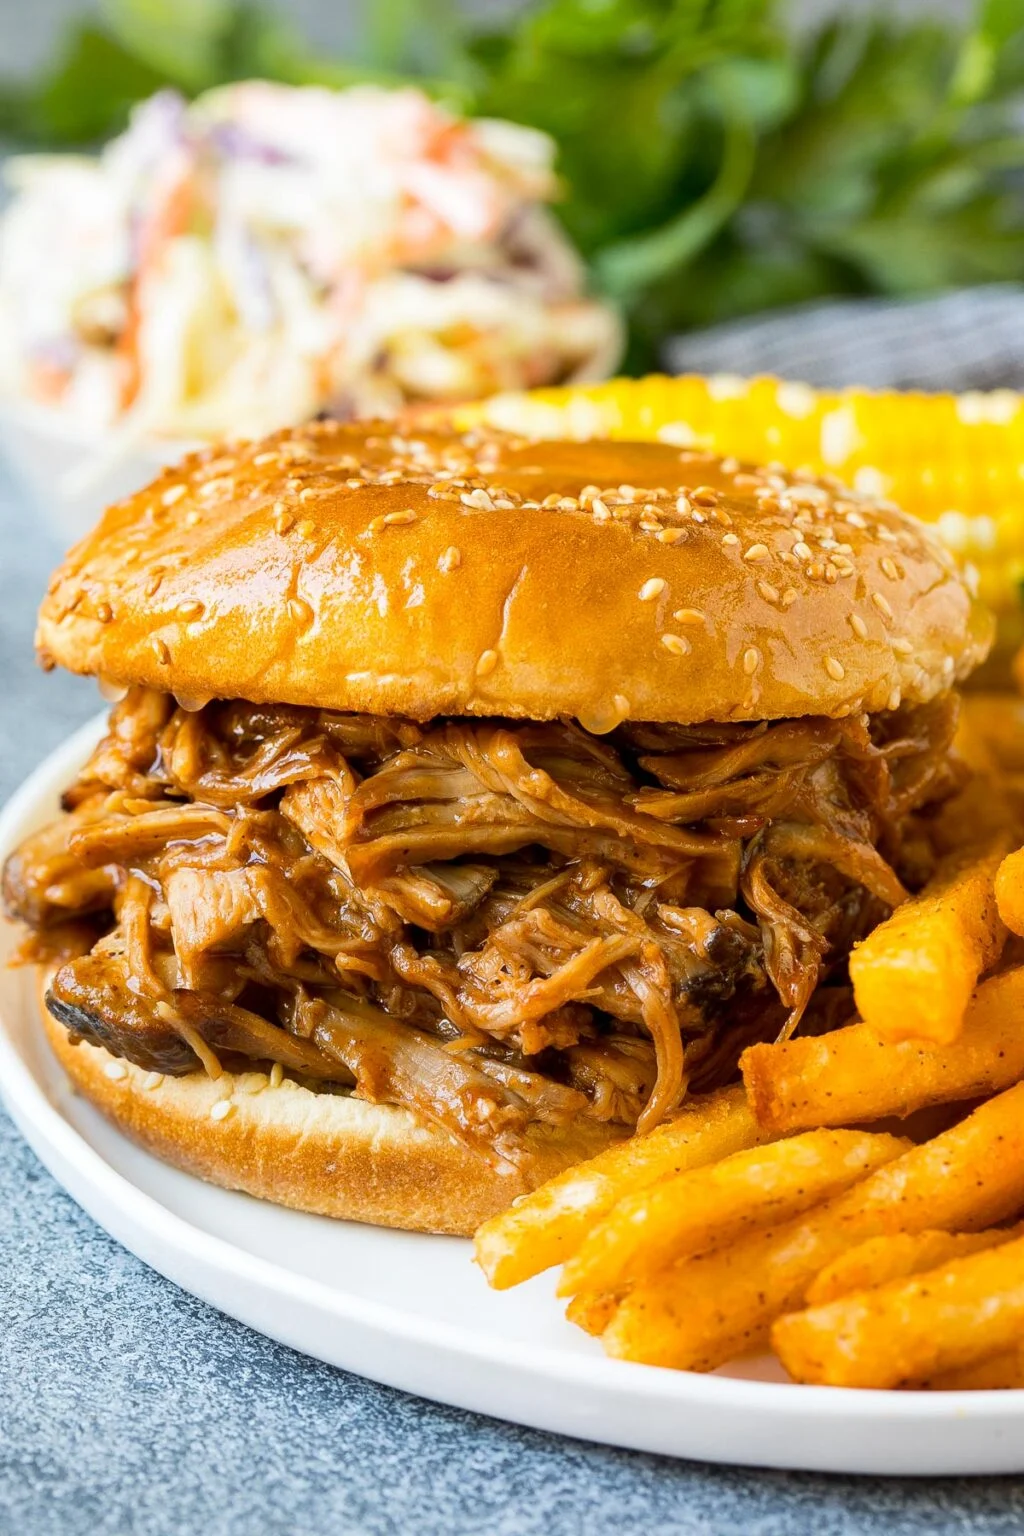 Pulled pork on a bun with fries is something your father would love on father's day.